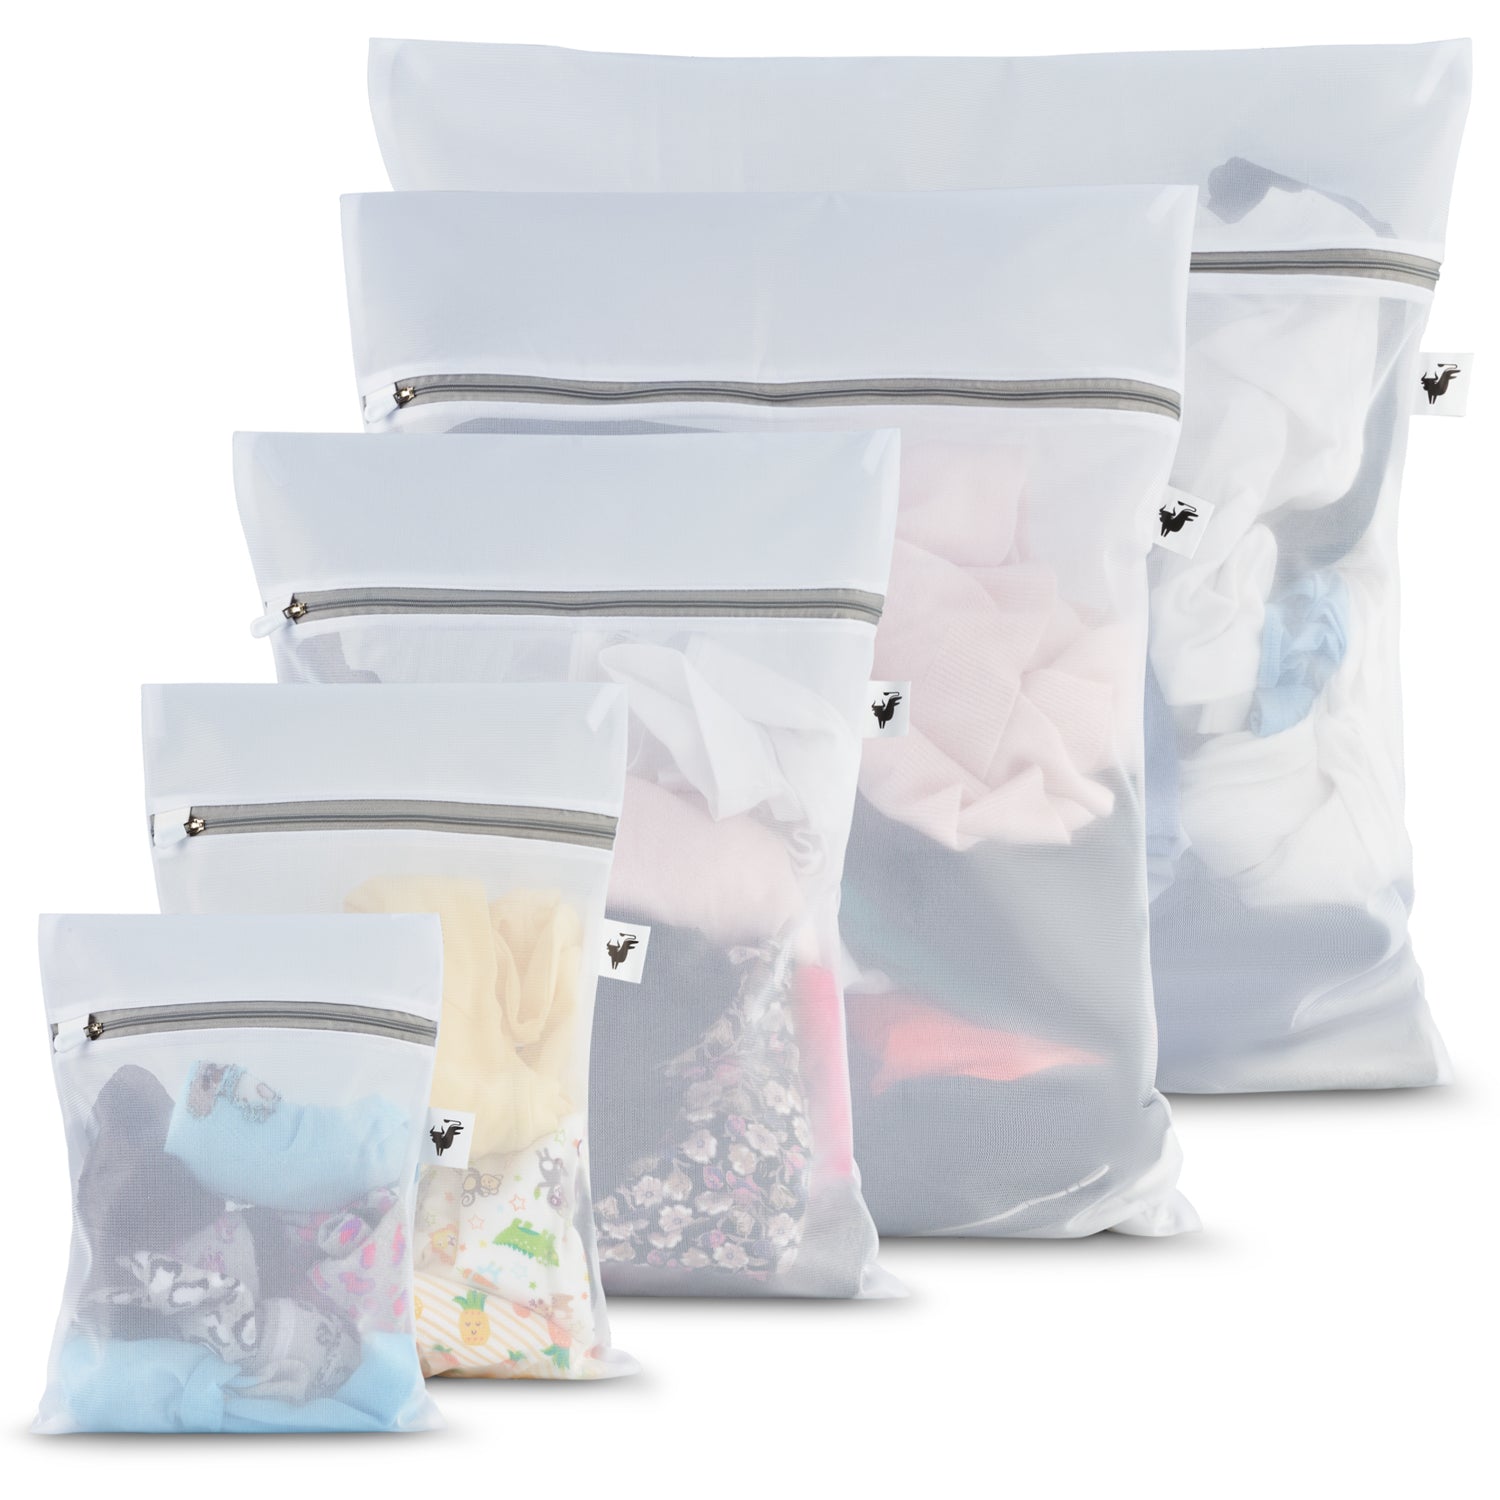 5 sizes of DimBull Washing Machine Laundry Bags to choose from